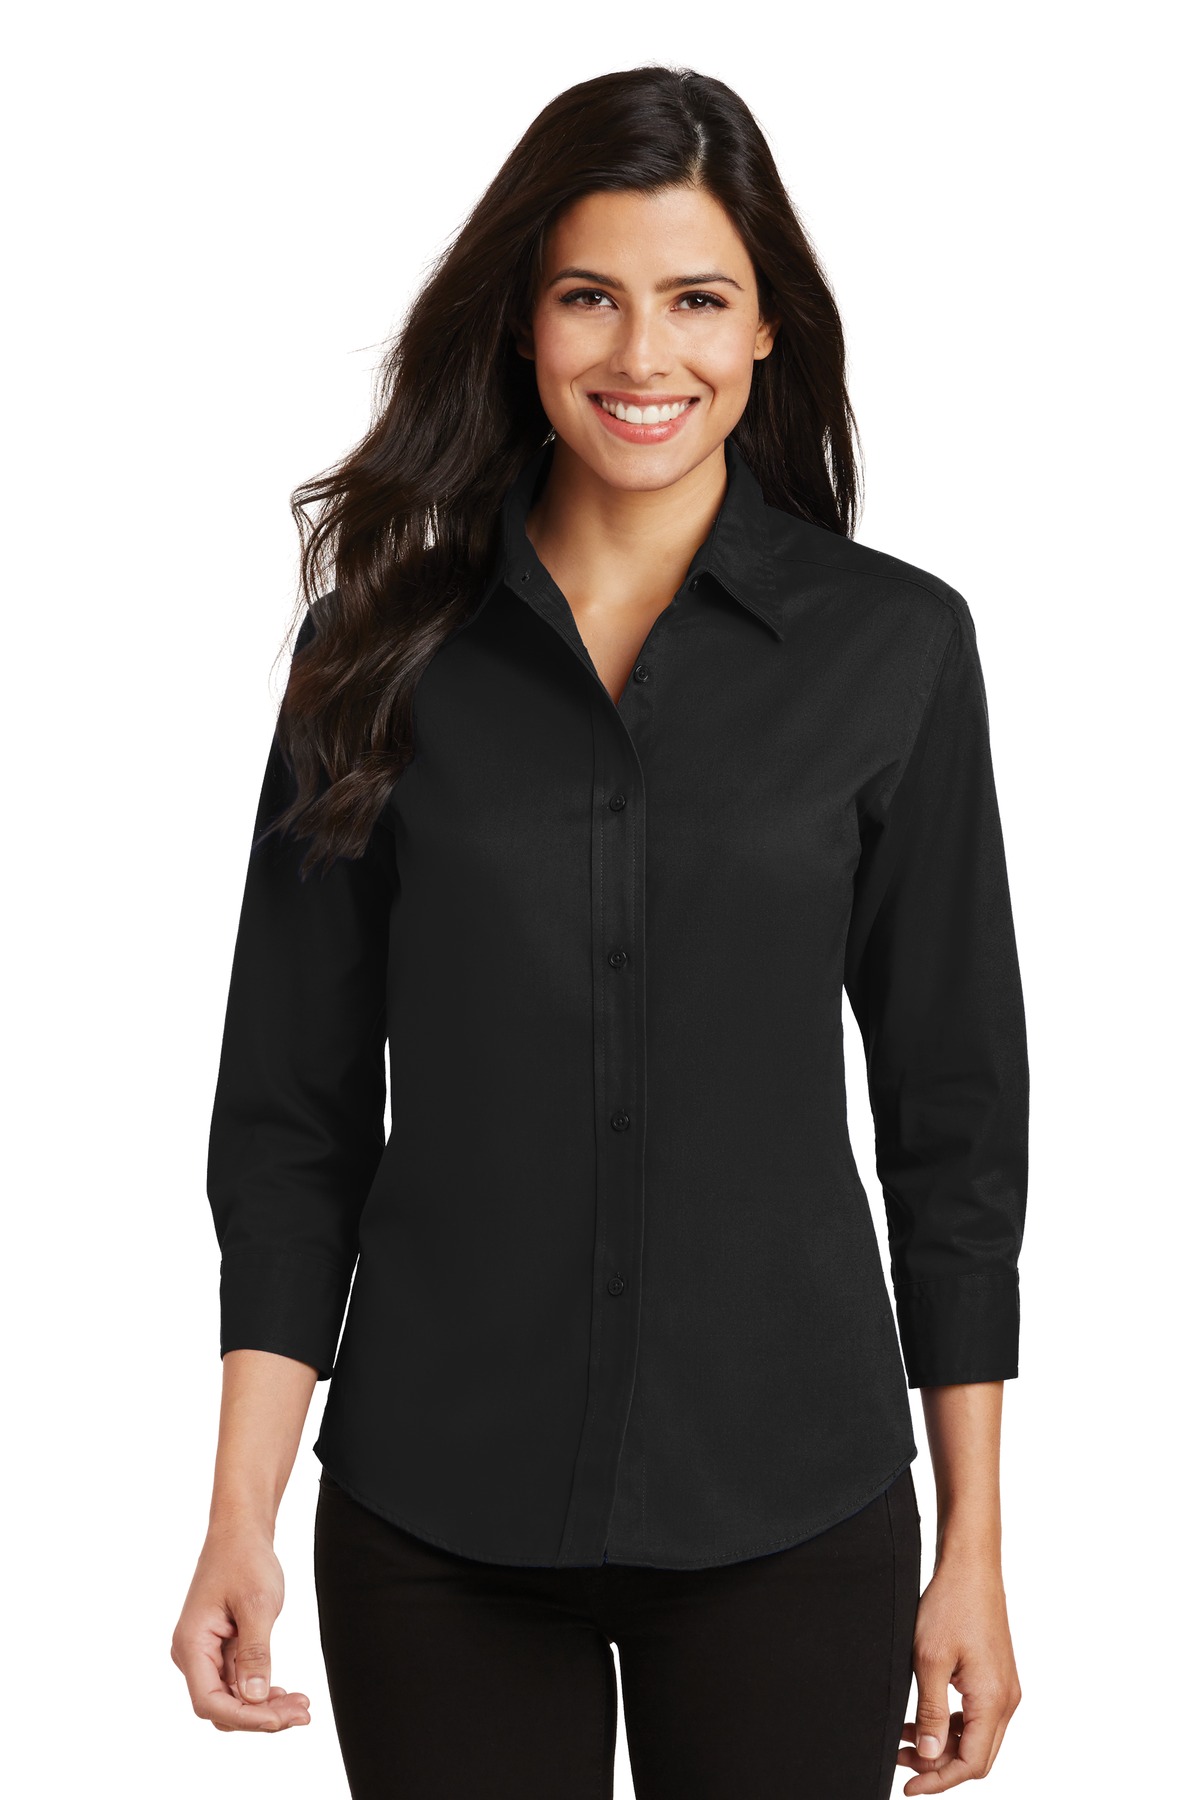 Port Authority Ladies Woven Shirts for Hospitality- ® Ladies 3/4-Sleeve Easy Care Shirt.-Port Authority